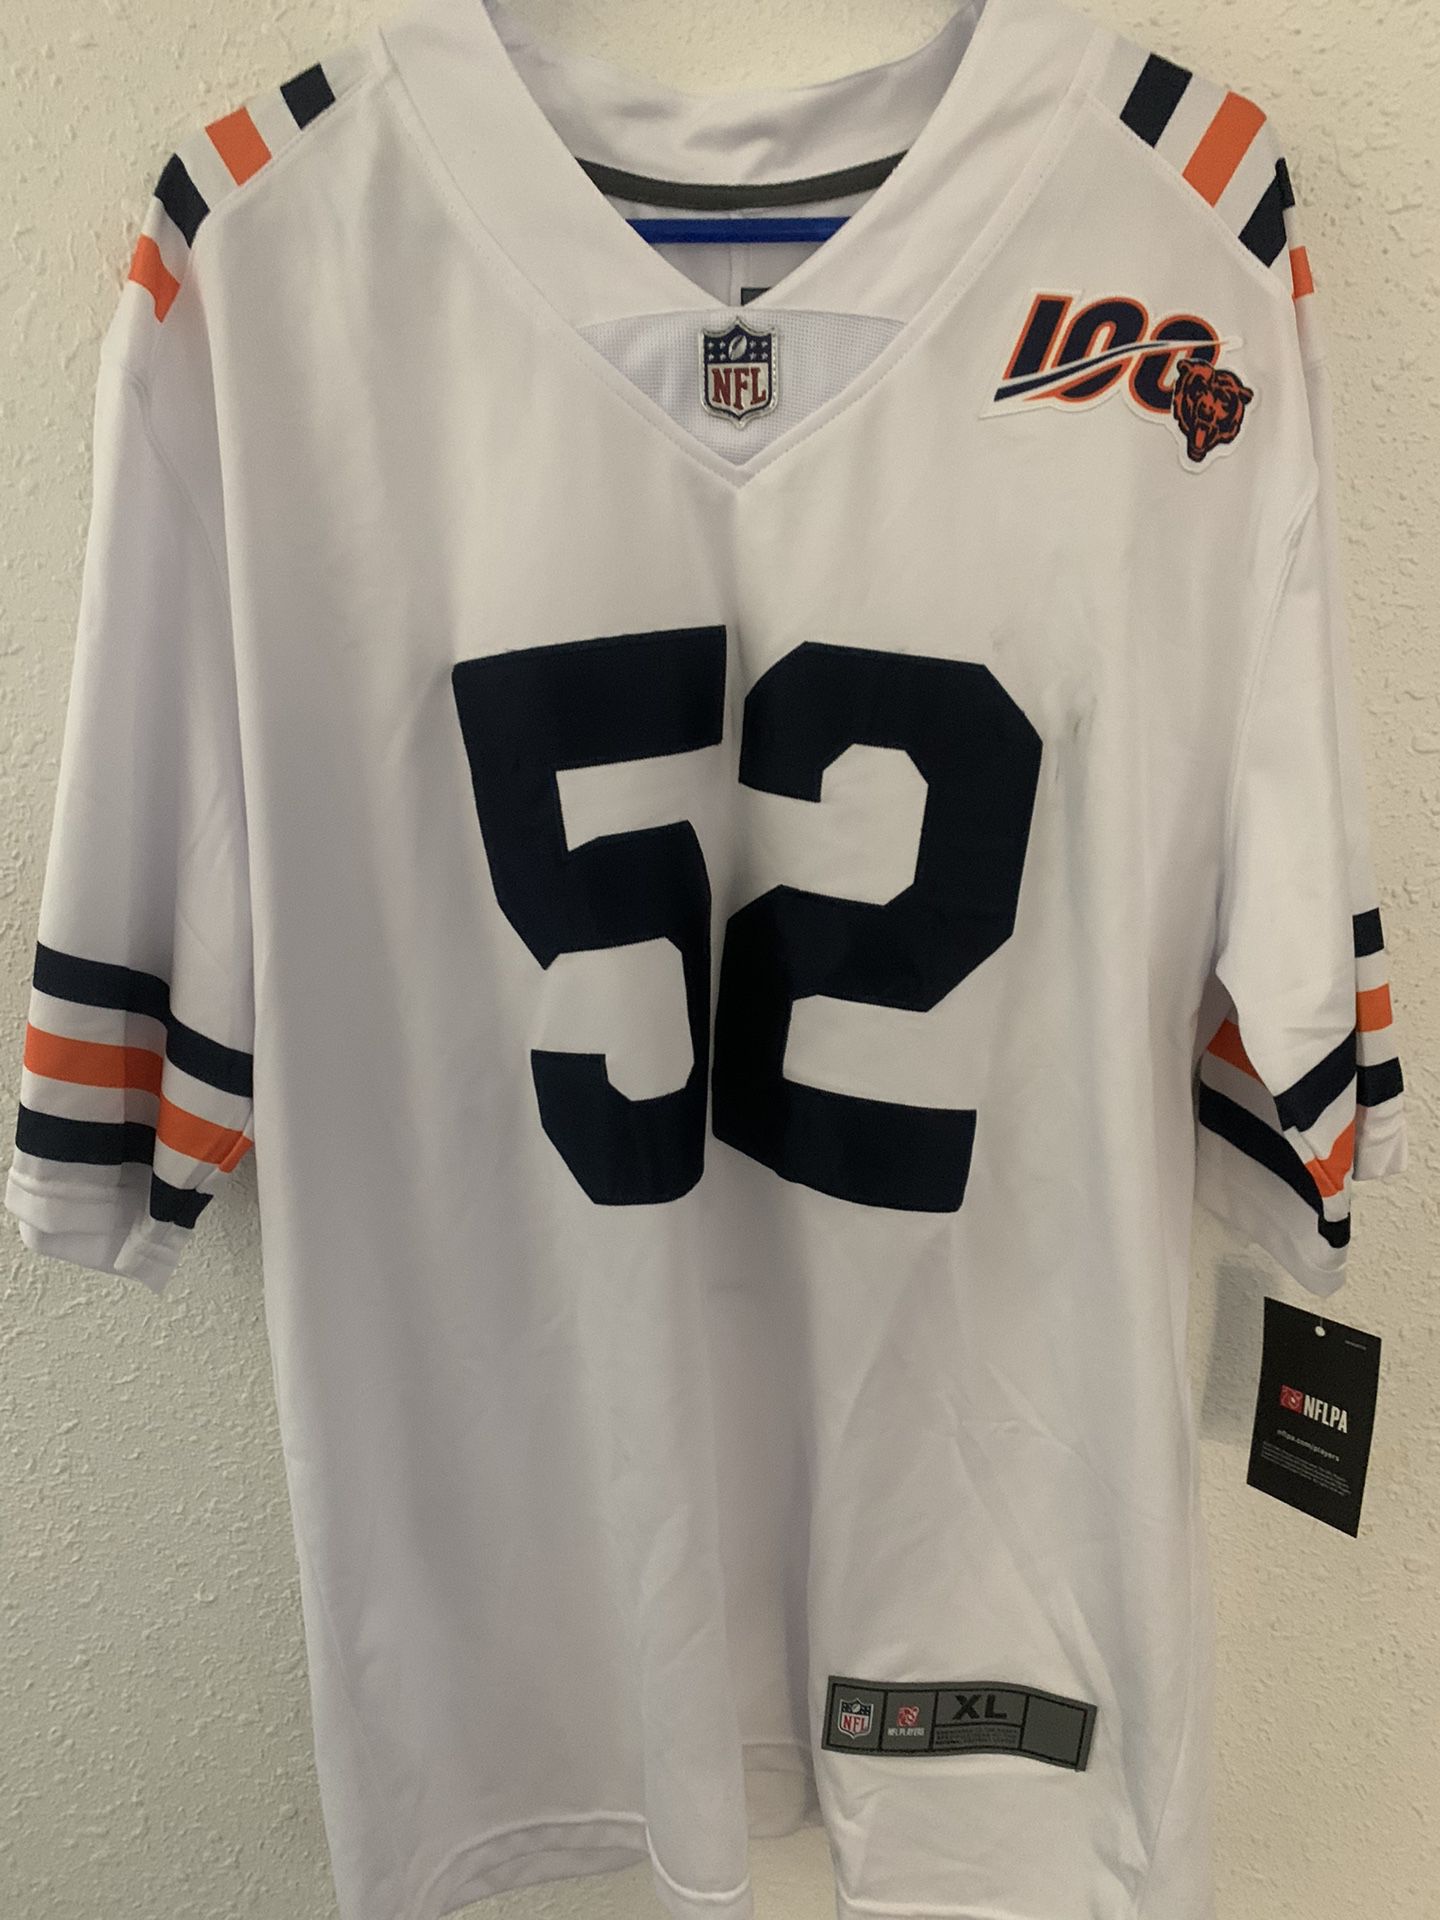 Khalil Mack Chicago Bears Jersey Size Kids Large for Sale in Portland, OR -  OfferUp